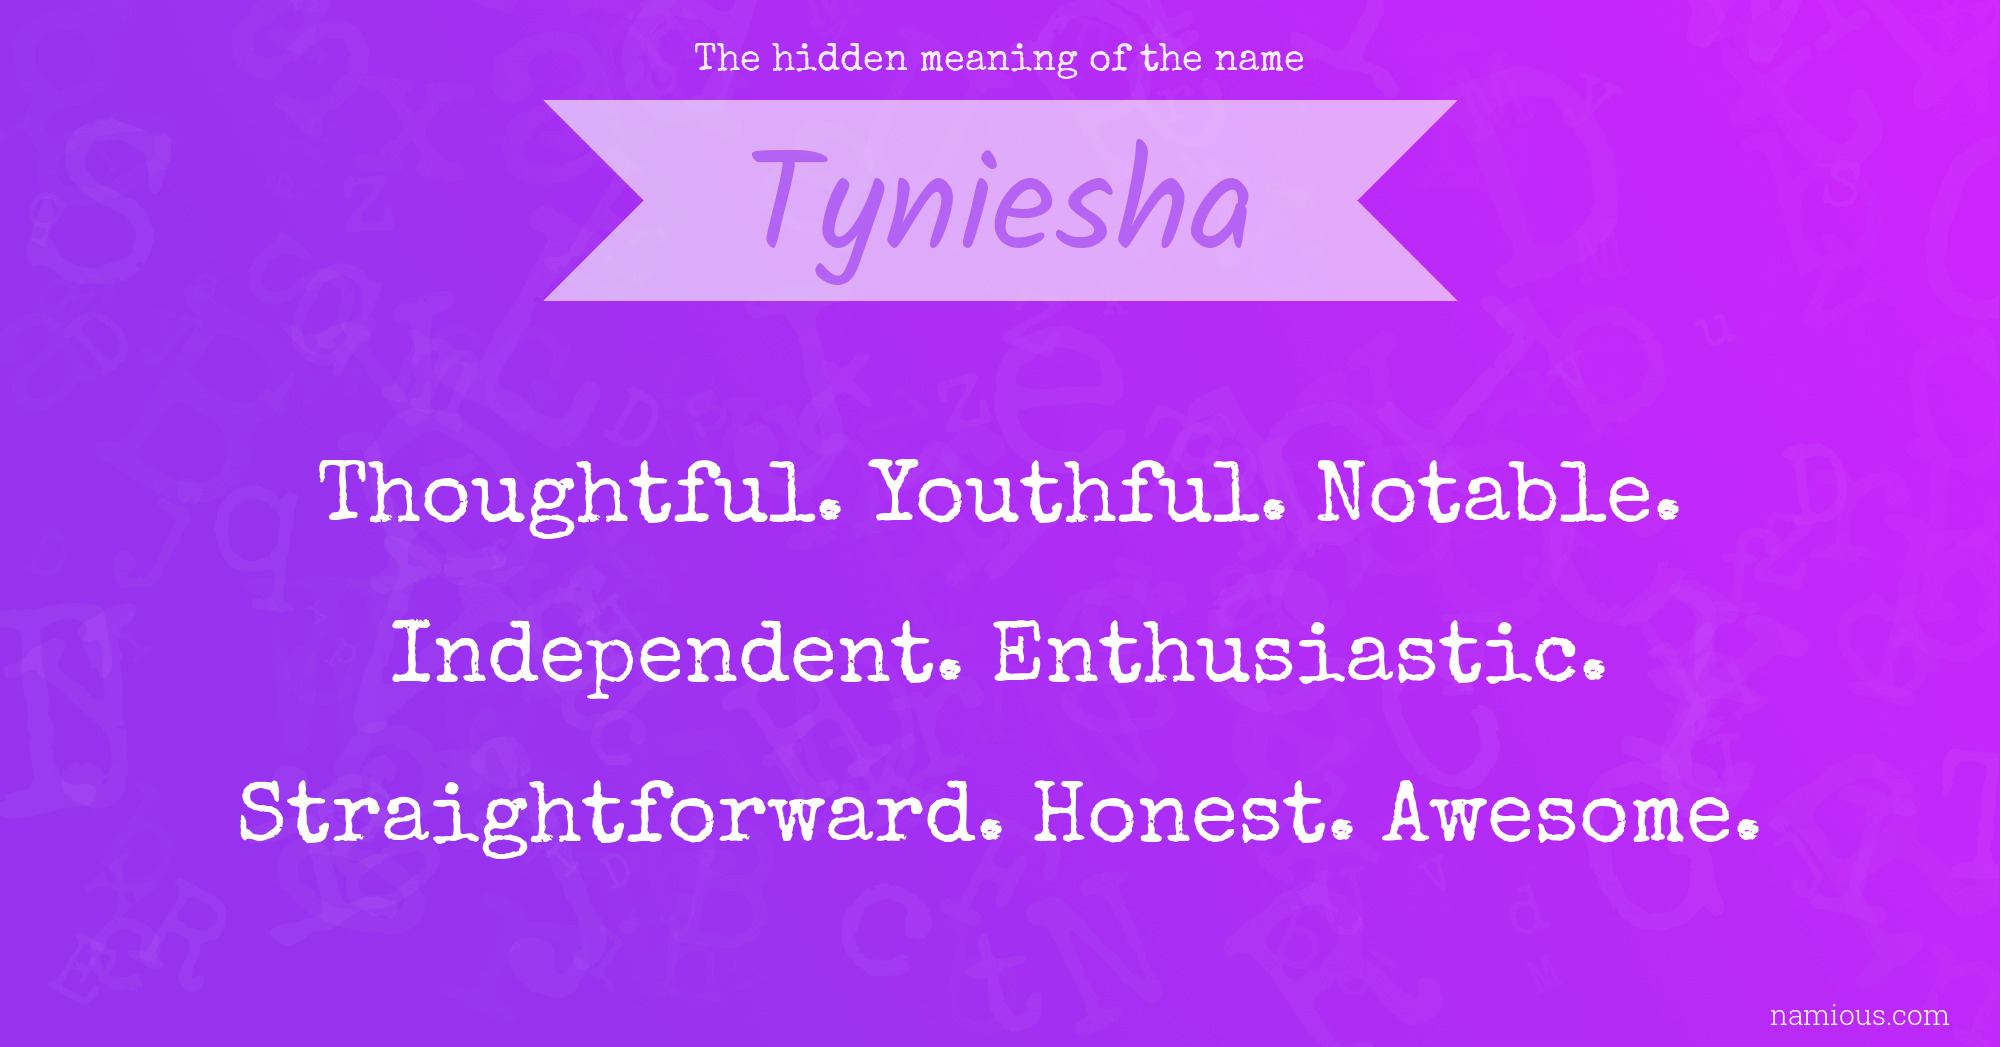 The hidden meaning of the name Tyniesha